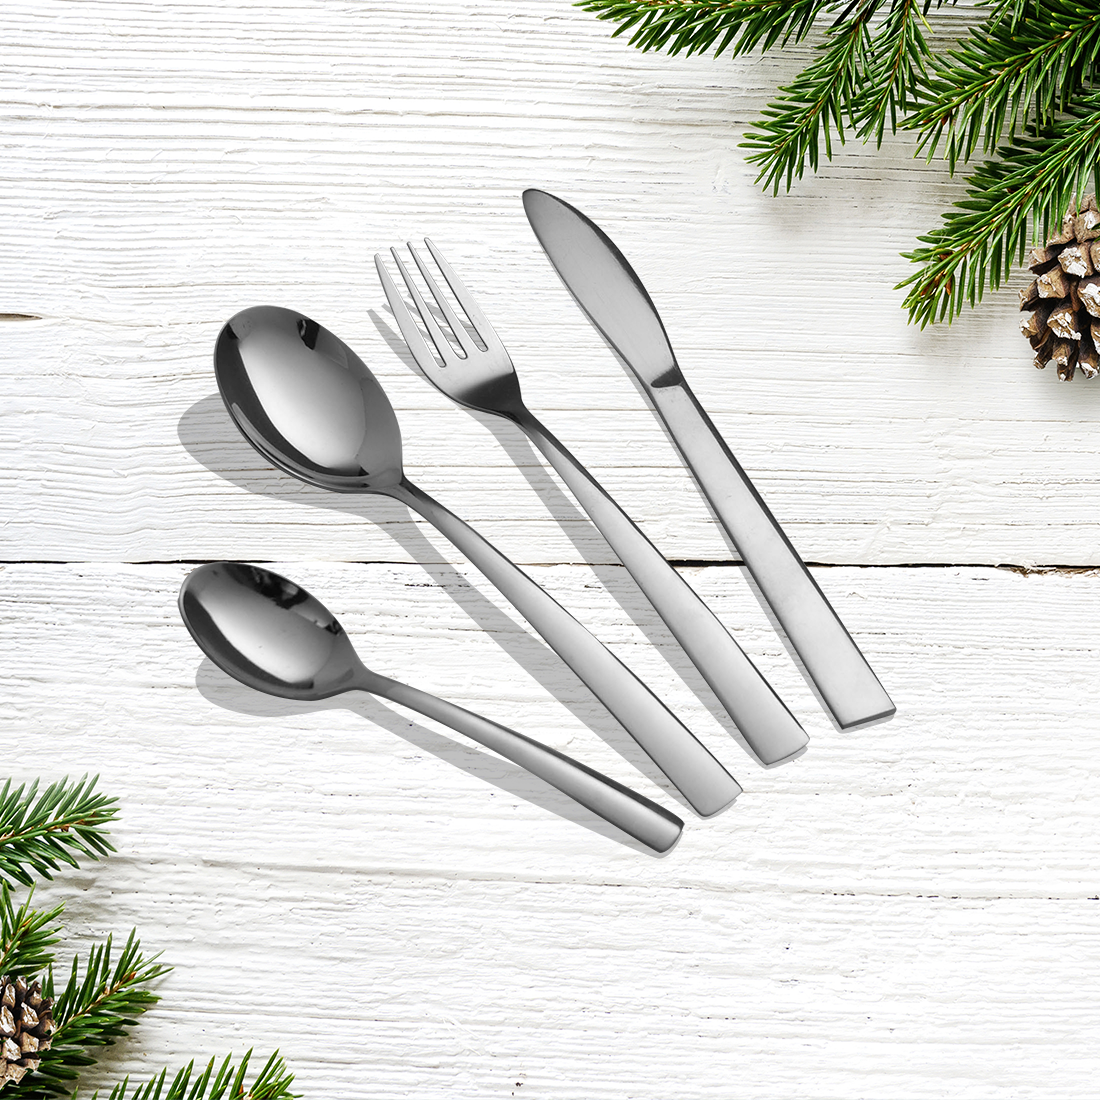 All You Need To Know About Cutlery?